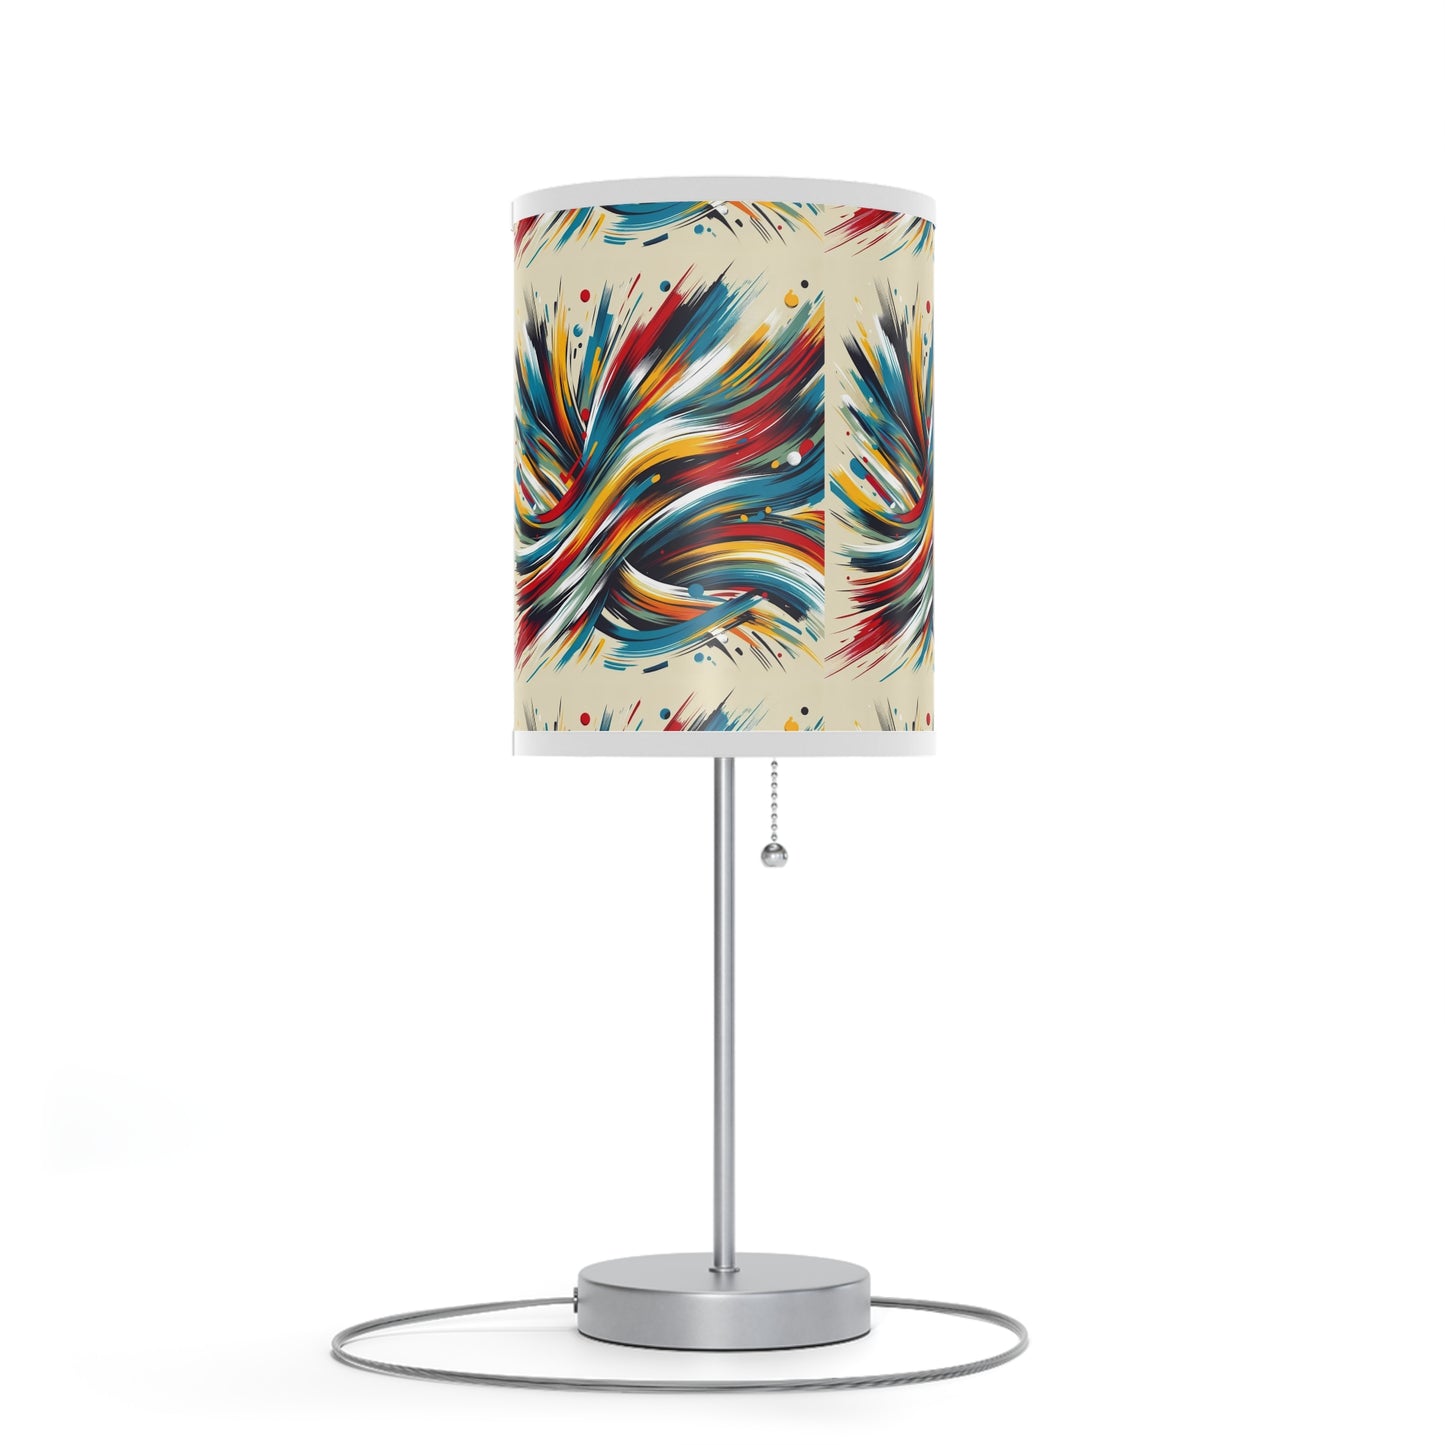 Expressionist Aura Table Lamp